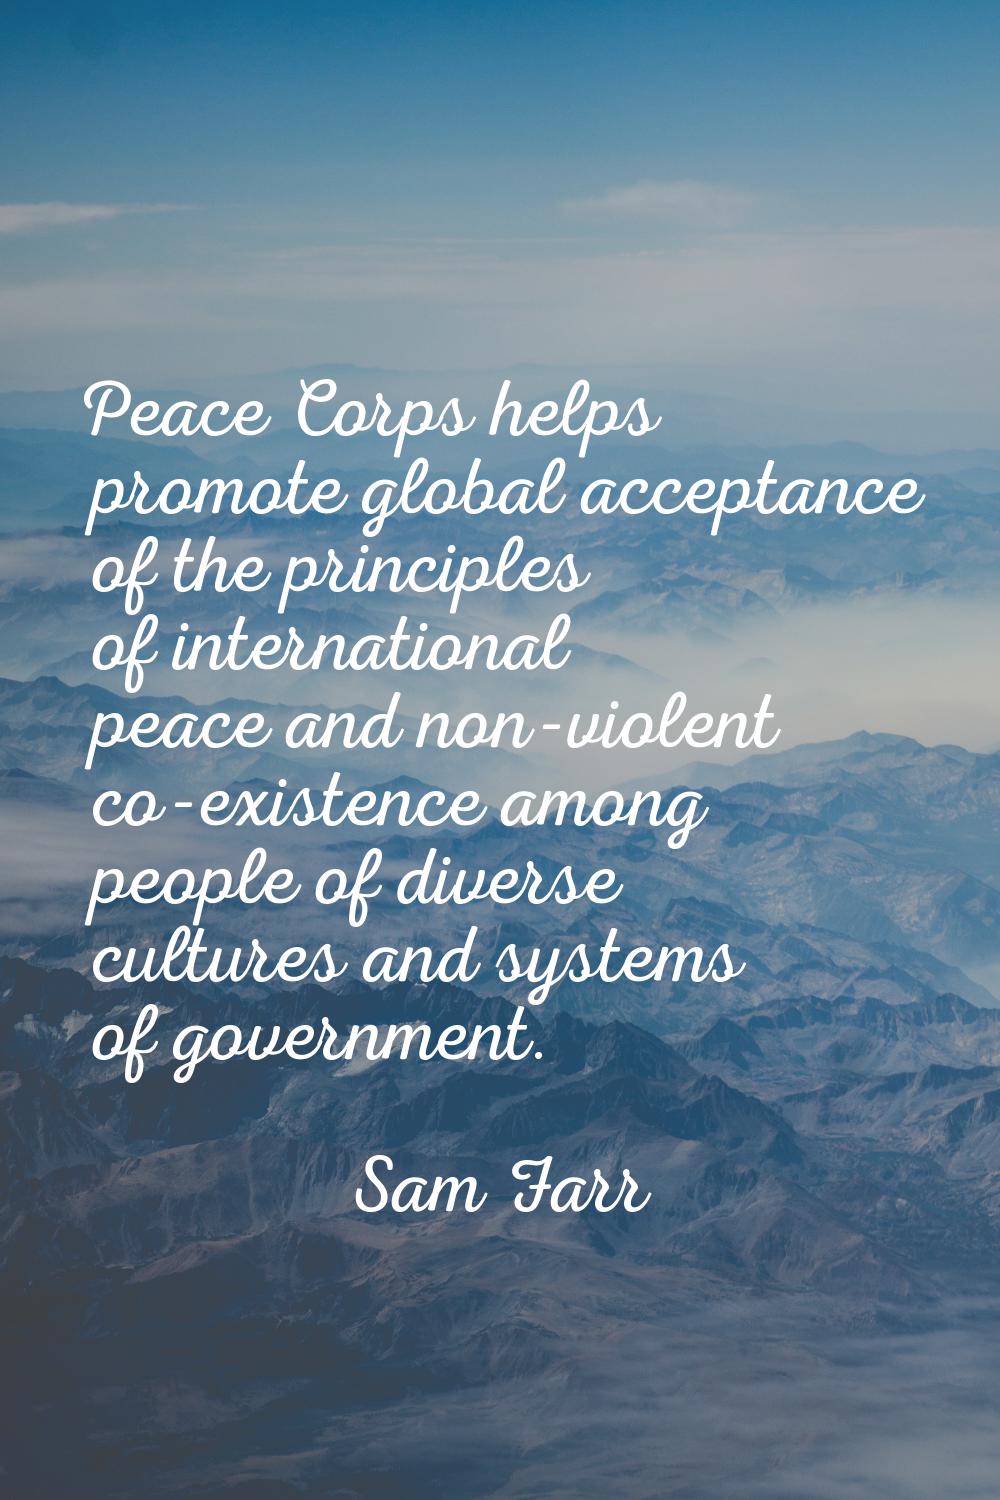 Peace Corps helps promote global acceptance of the principles of international peace and non-violen